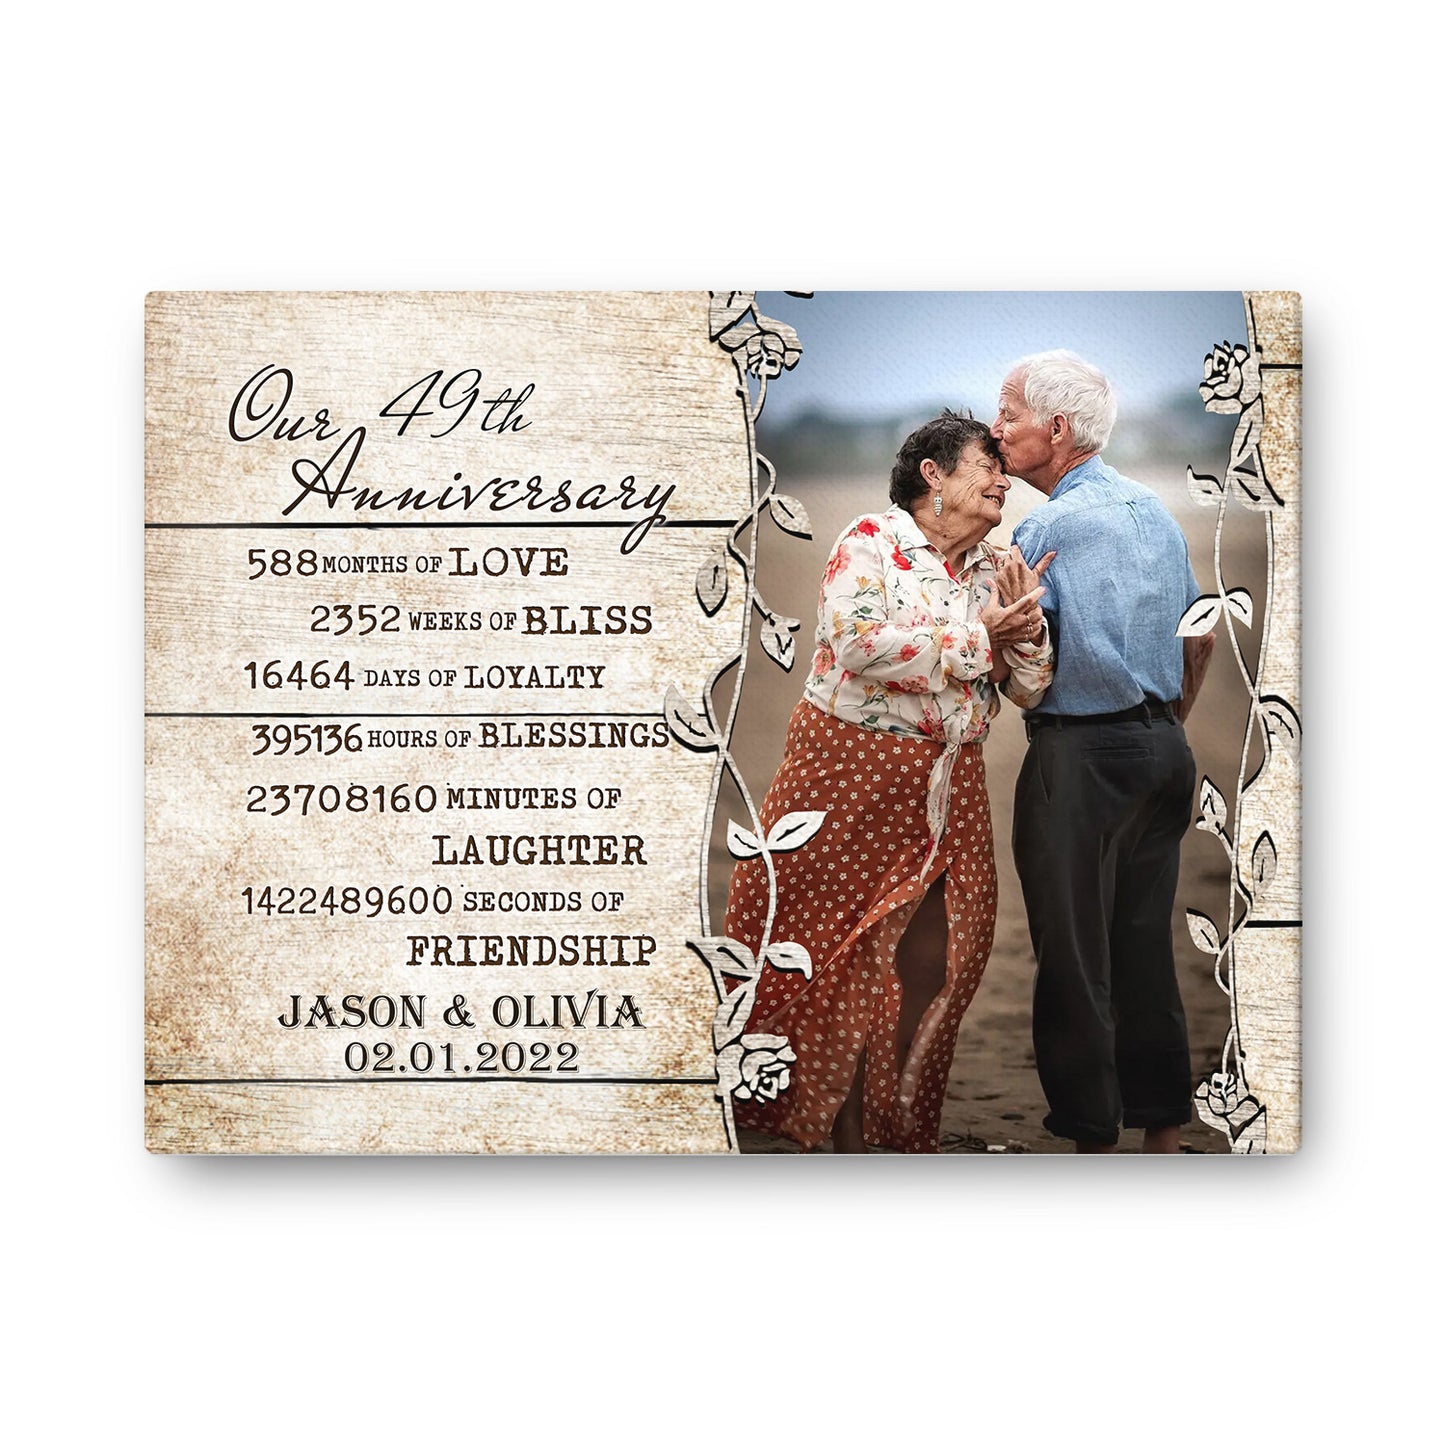 Our 49th Anniversary Timeless love Valentine Gift Personalized Canvas